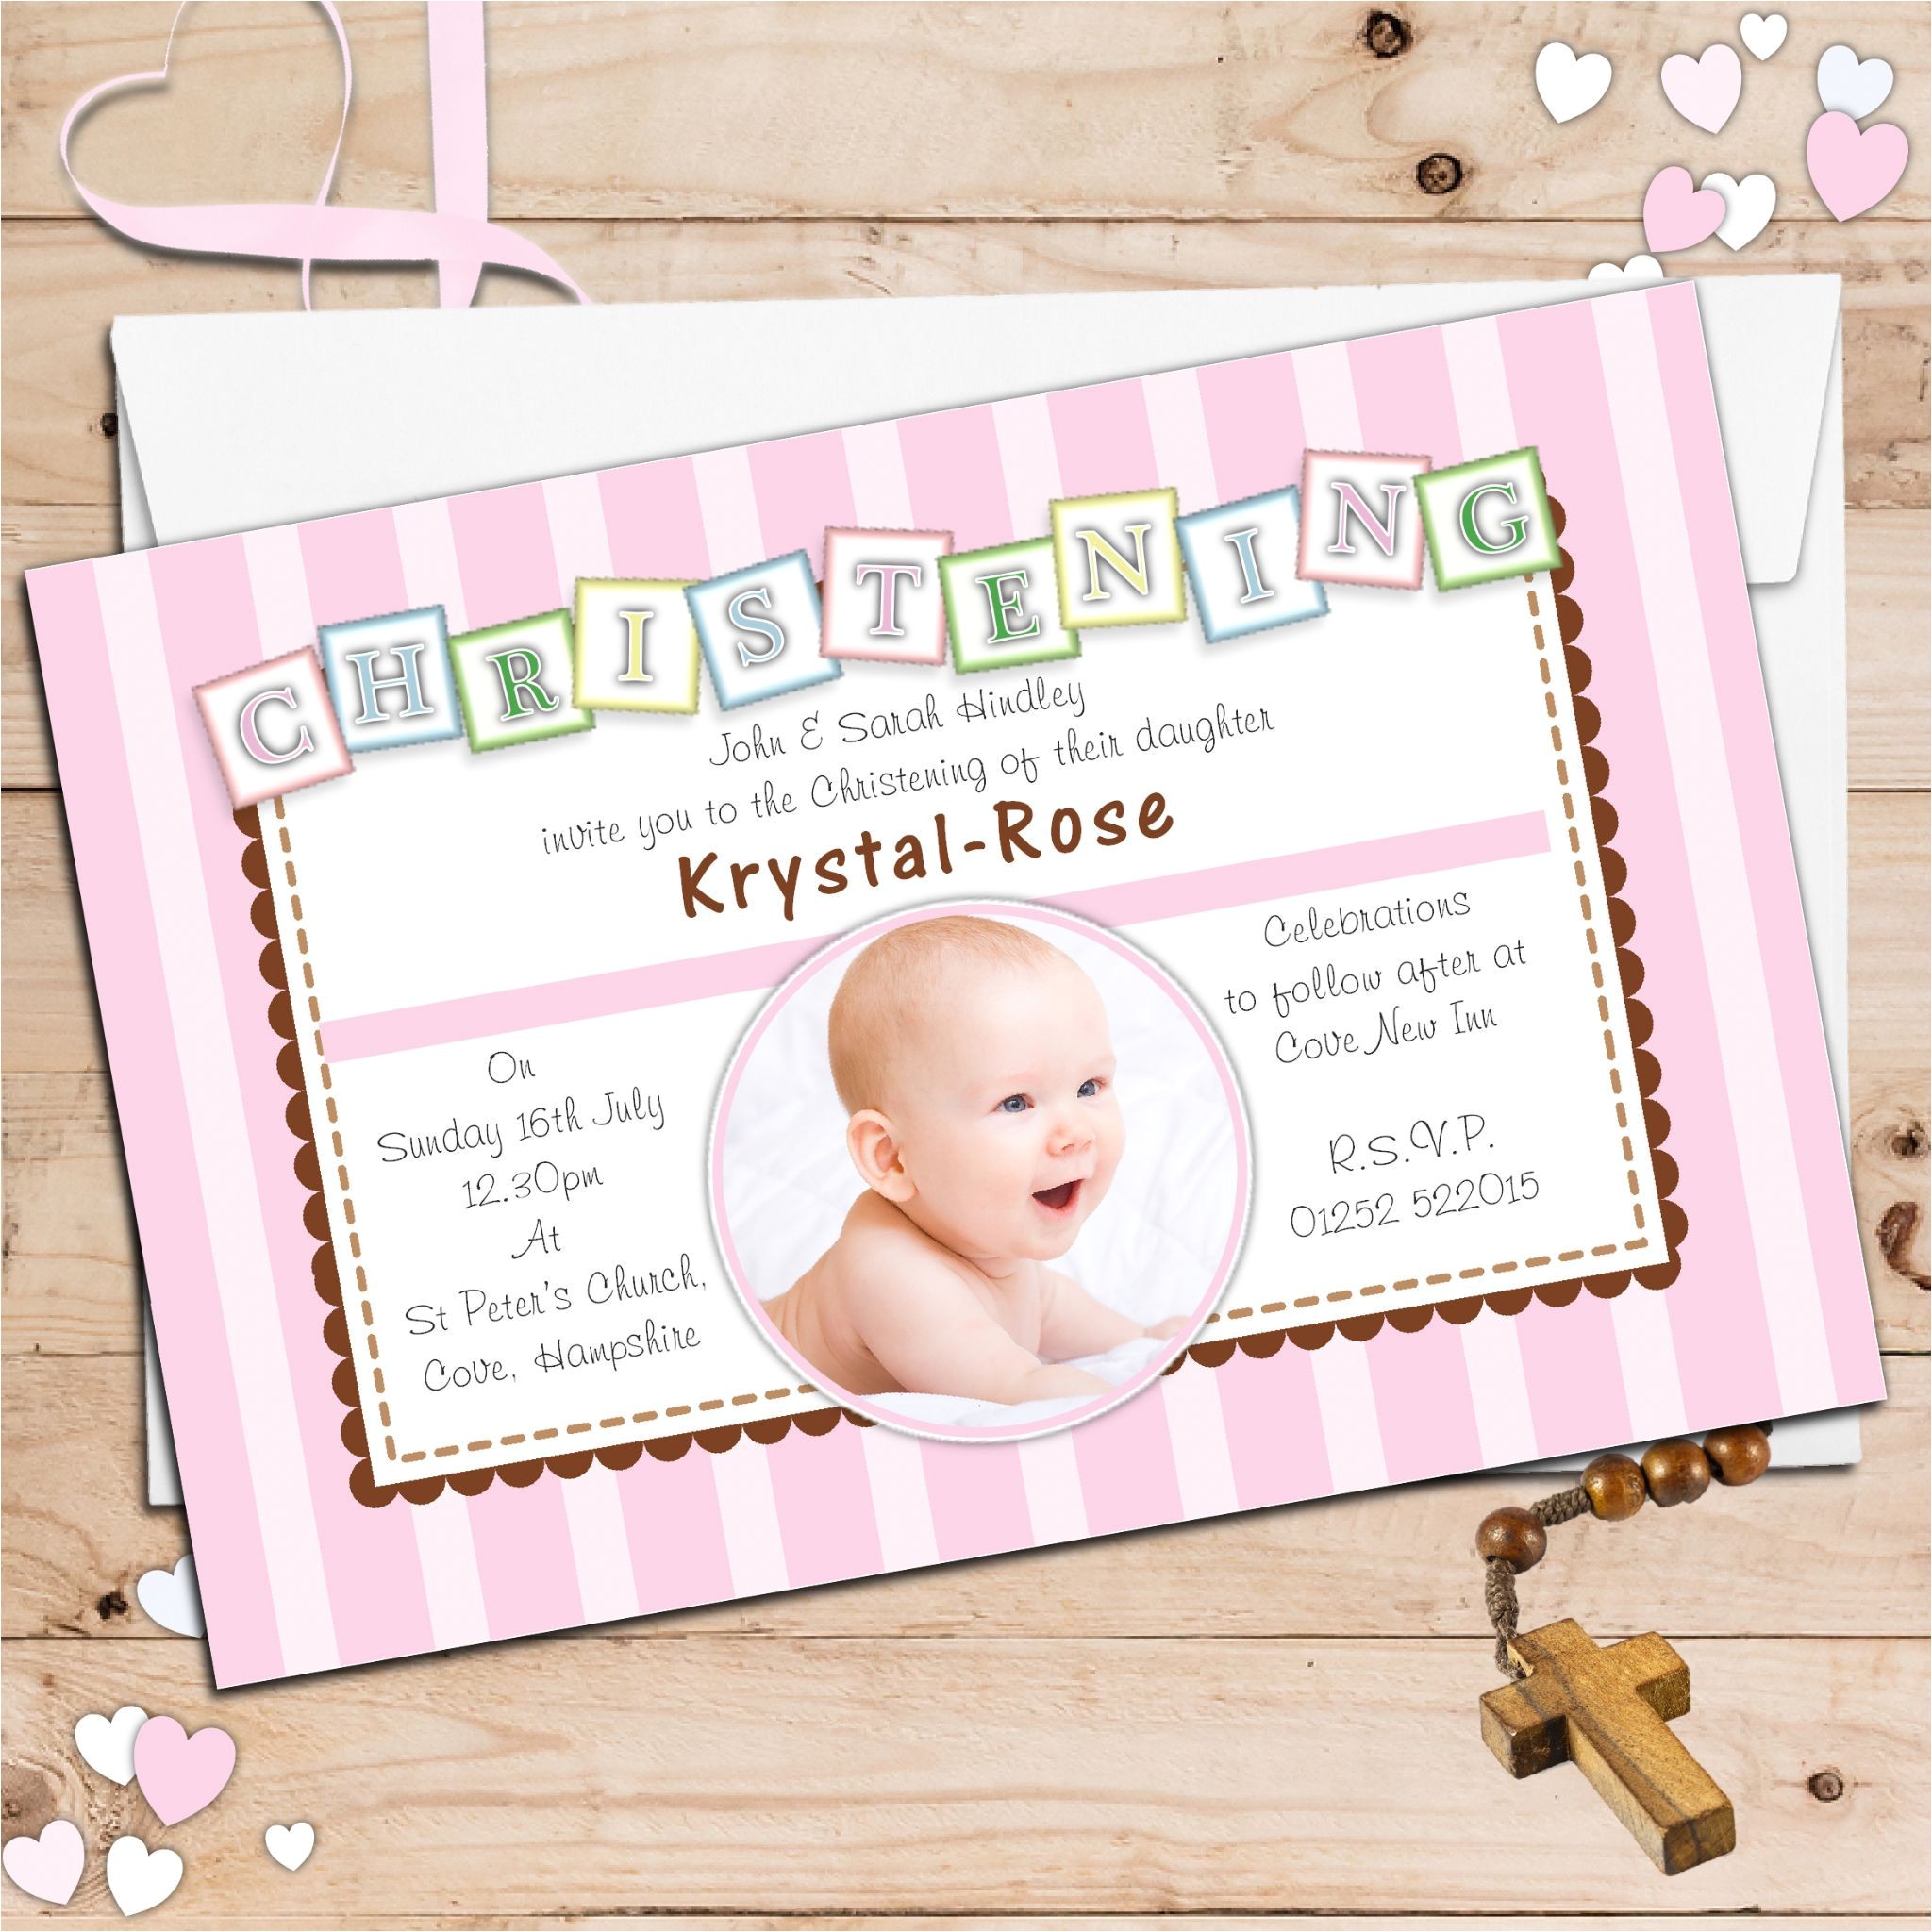 baptism invitation card for baby girl